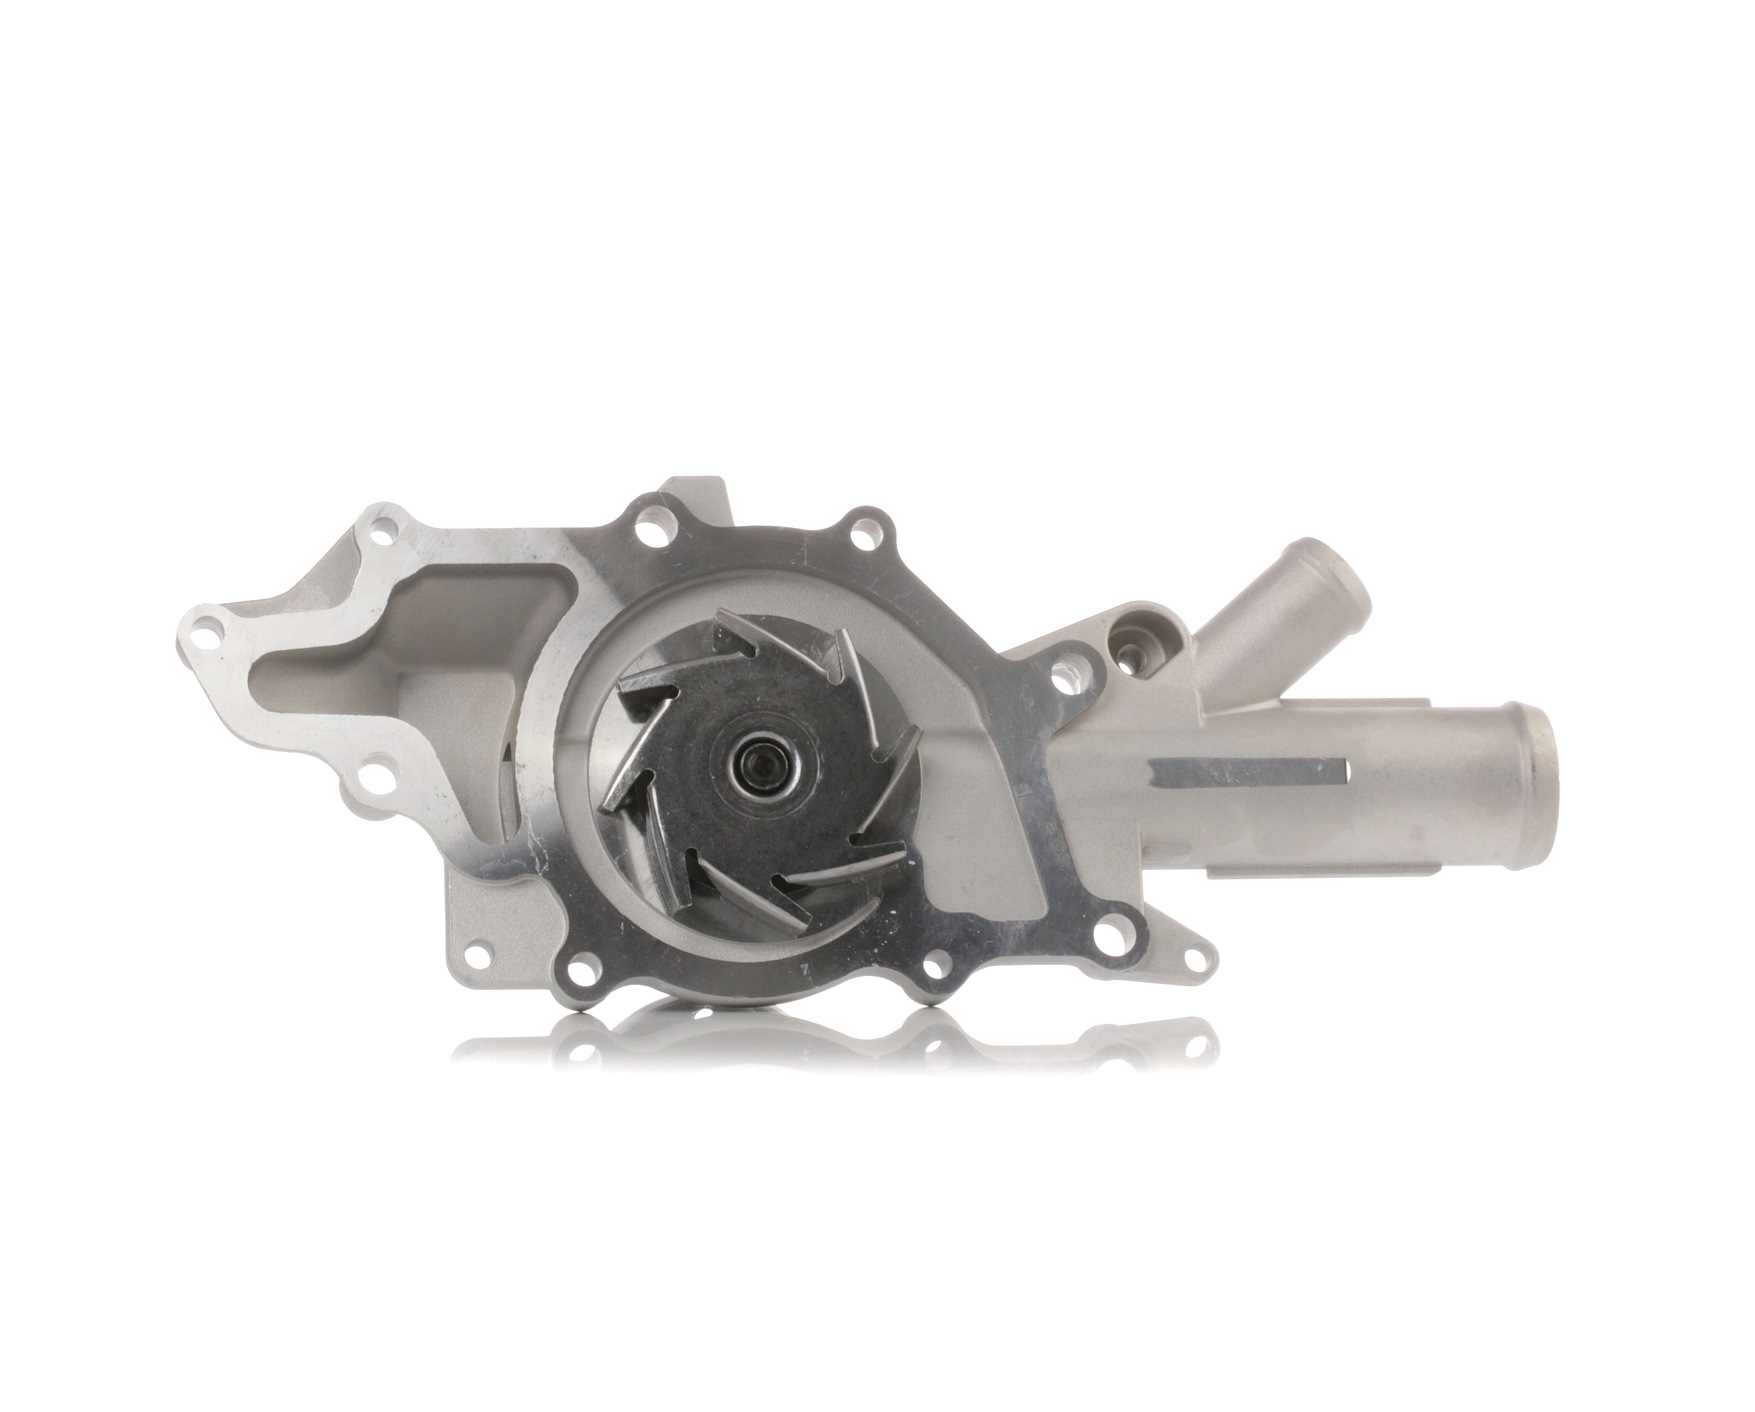 STARK SKWP-0520103 Water pump Cast Aluminium, without belt pulley, with gaskets/seals, Mechanical, Metal impeller